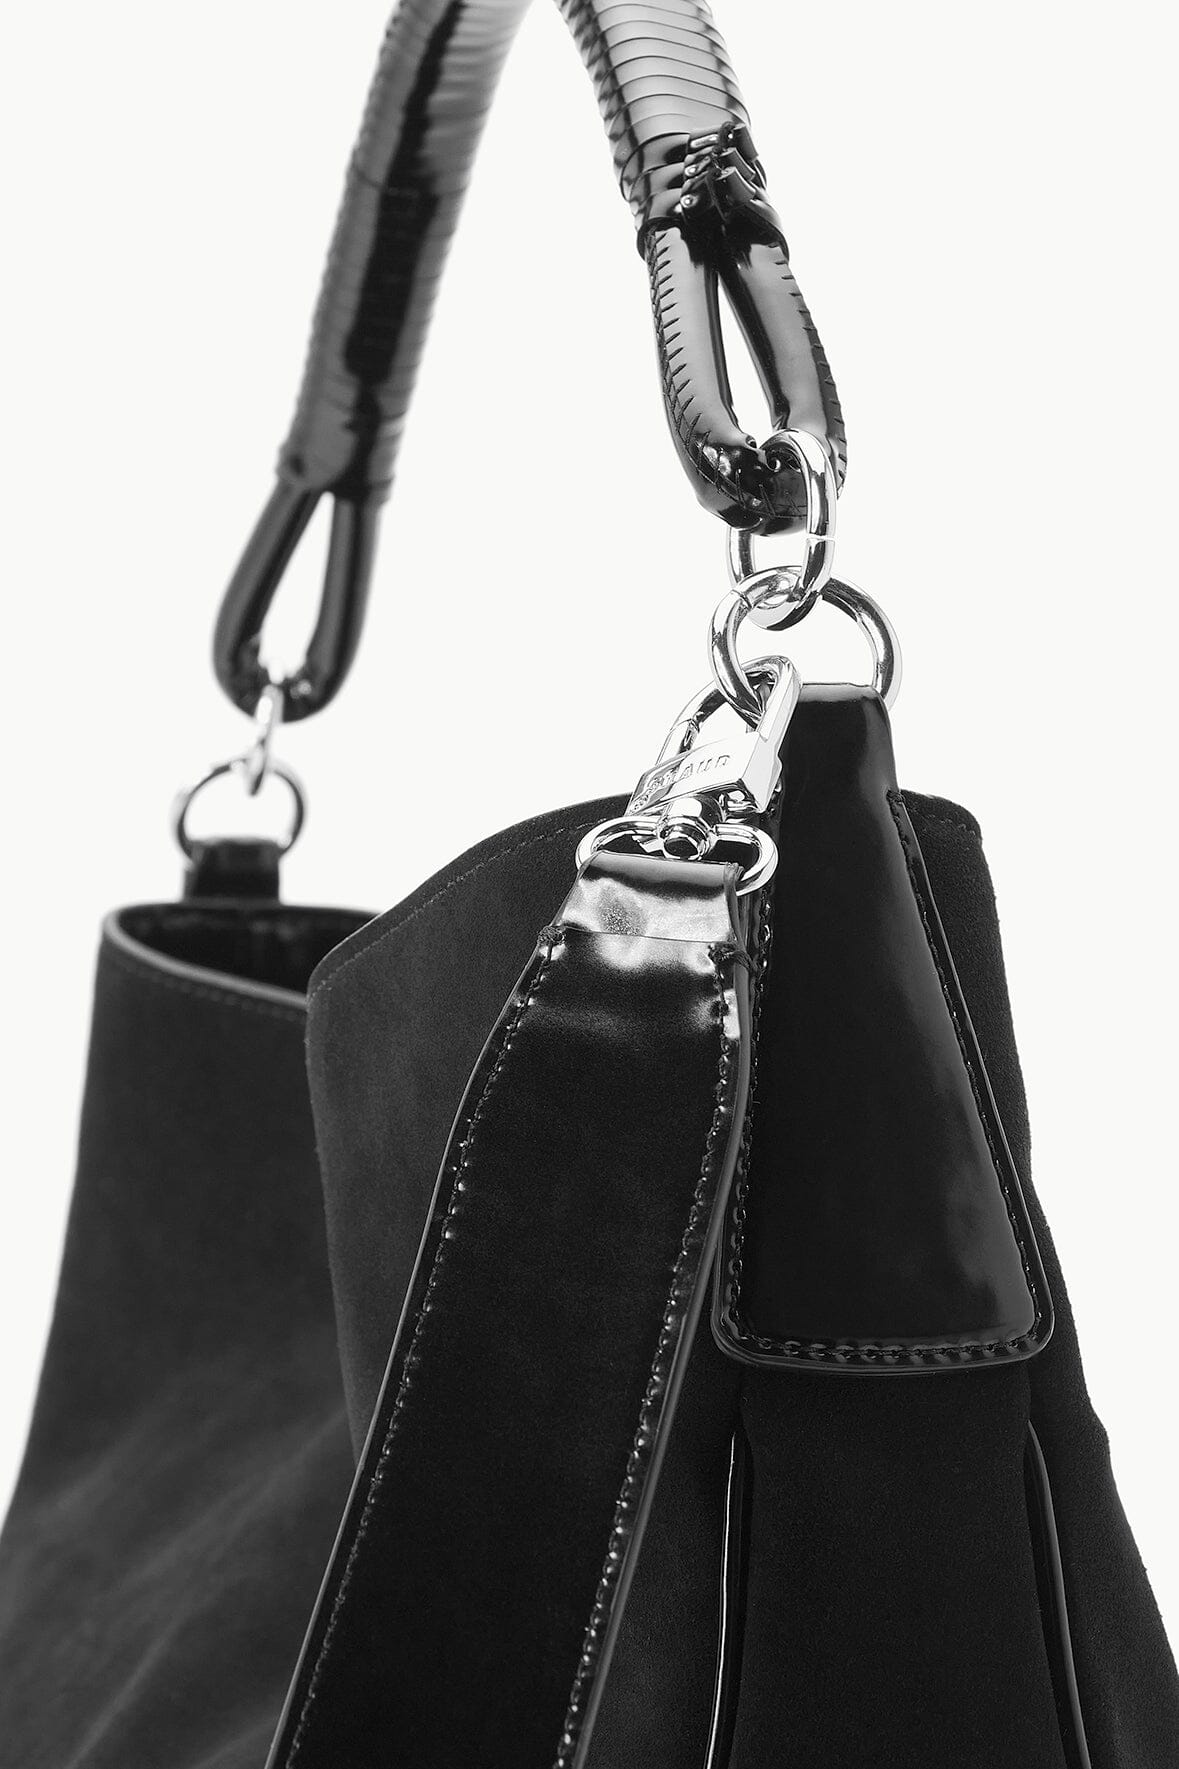 Leather Hobo Shoulder Bag : Black Hair Calf and Suede Leather